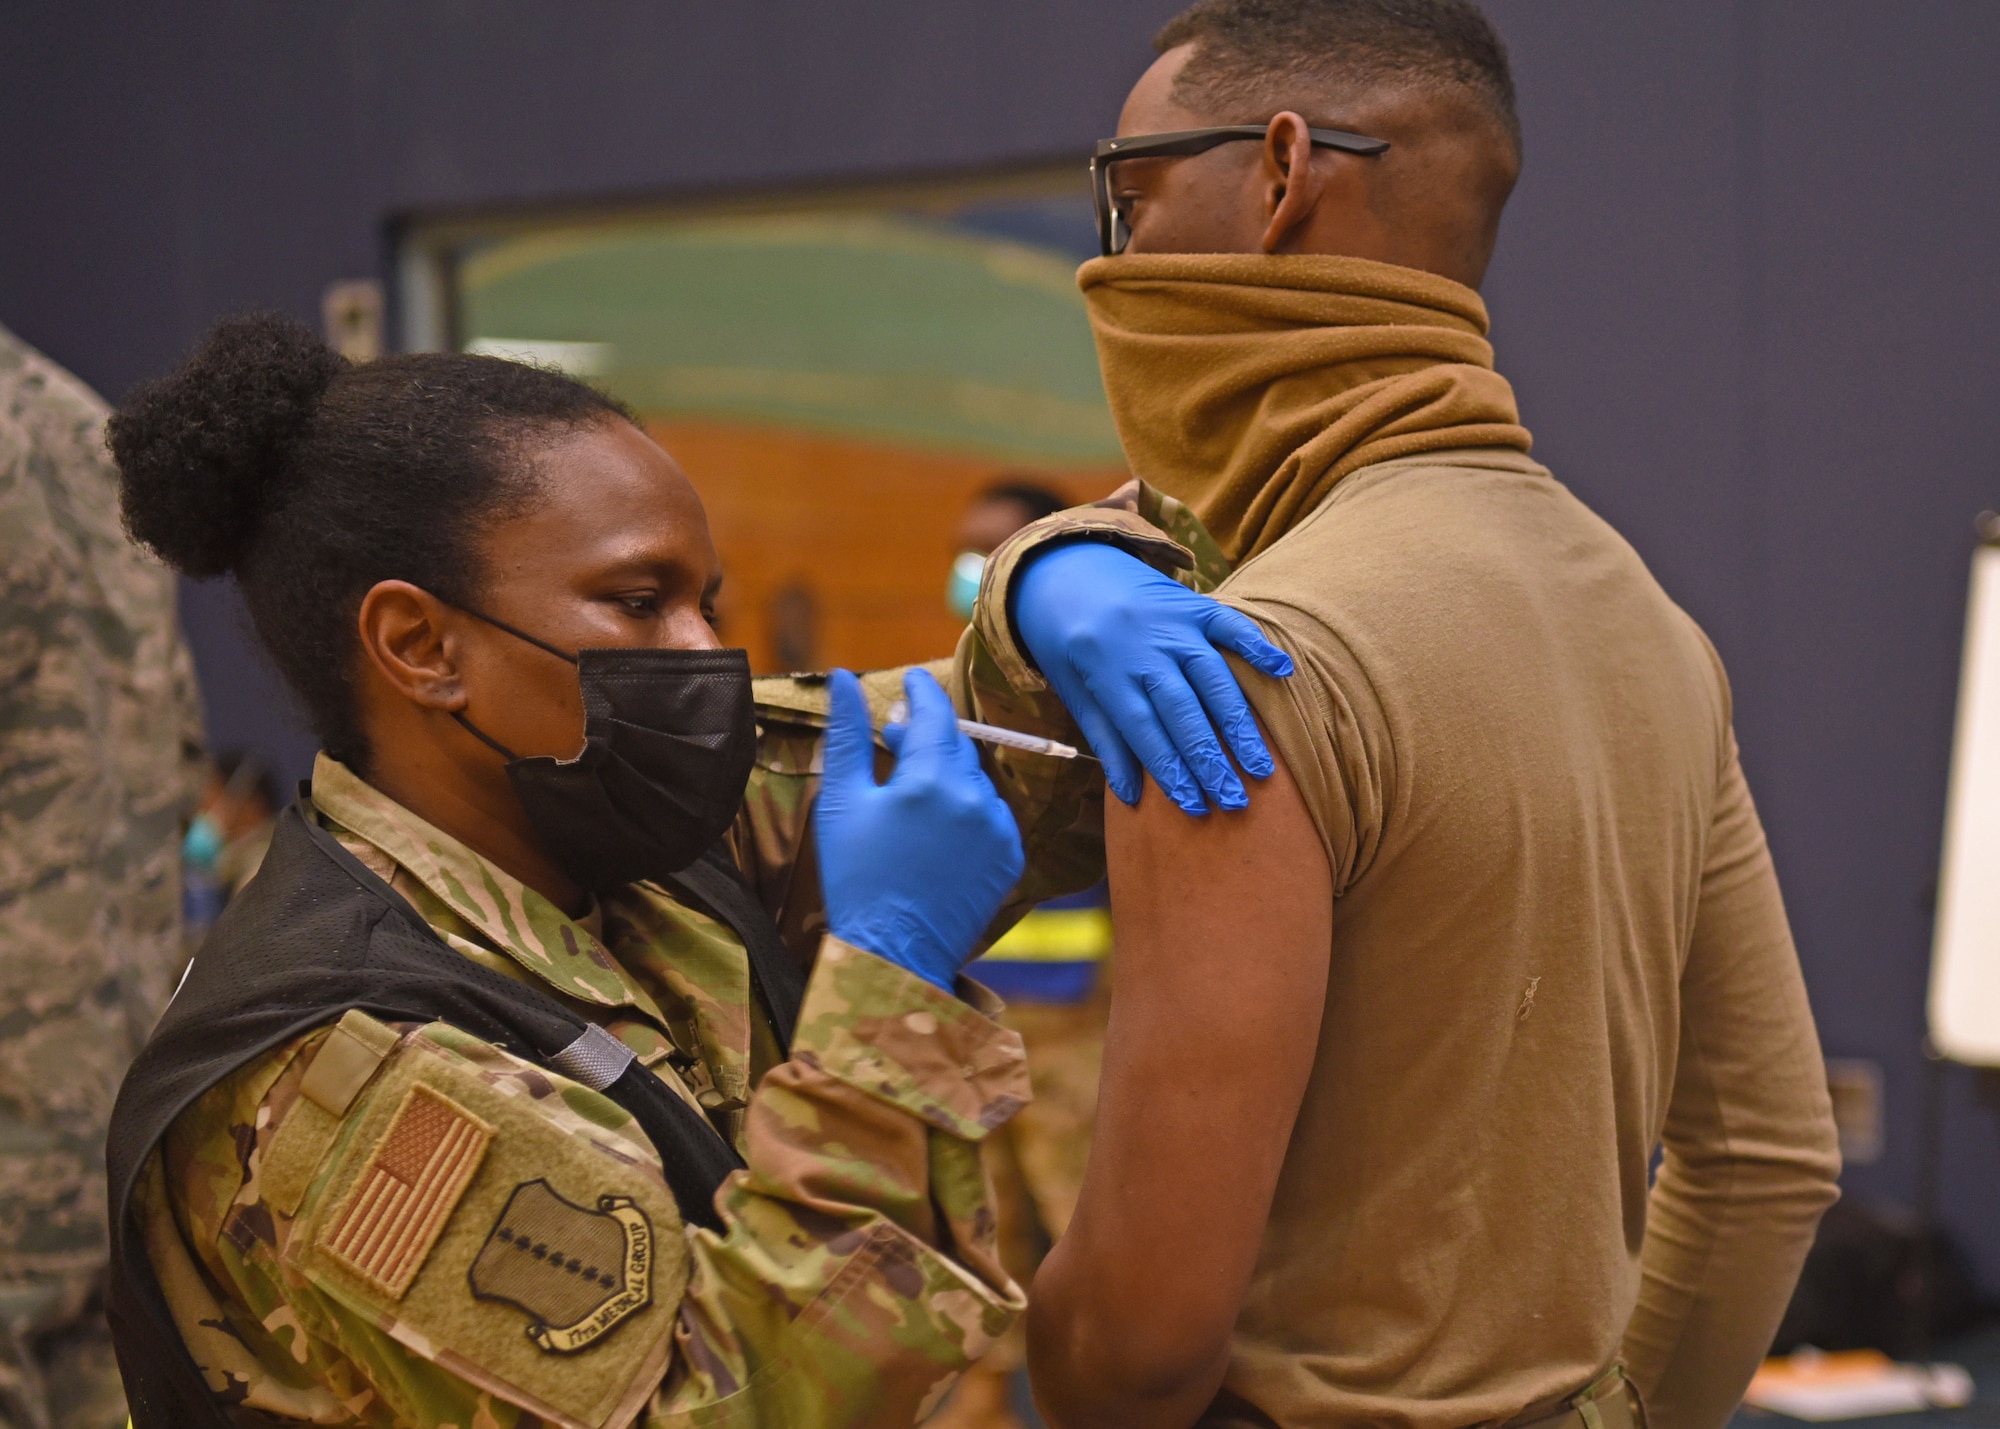 U.S. Air Force Lt. Col. Cynthia Ennis, 17th Medical Group command staff healthcare integrator, administers the first COVID-19 vaccine to Airman 1st Class Earl Newton, 17th Security Forces Squadron entry controller, at the immunization clinic inside the Mathis Fitness Center on Goodfellow Air Force Base, Texas, Jan. 20, 2021. Newton volunteered for the first round of COVID-19 vaccinations, which were distributed to Goodfellow personnel based on a predetermined priority. (U.S. Air Force photo by Senior Airman Abbey Rieves)